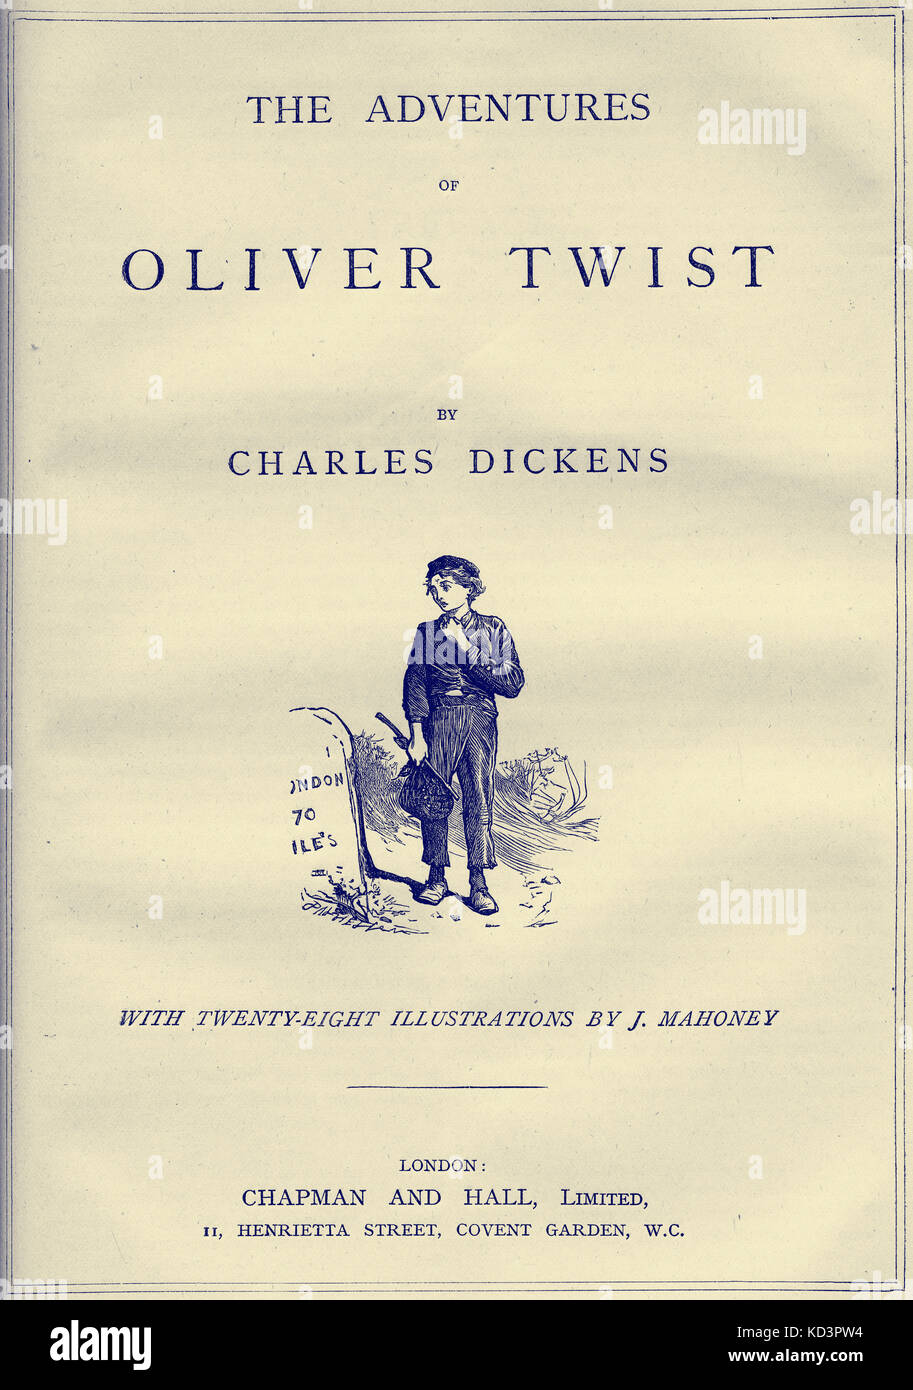 THE ADVENTURES OF OLIVER TWIST, Charles Dickens